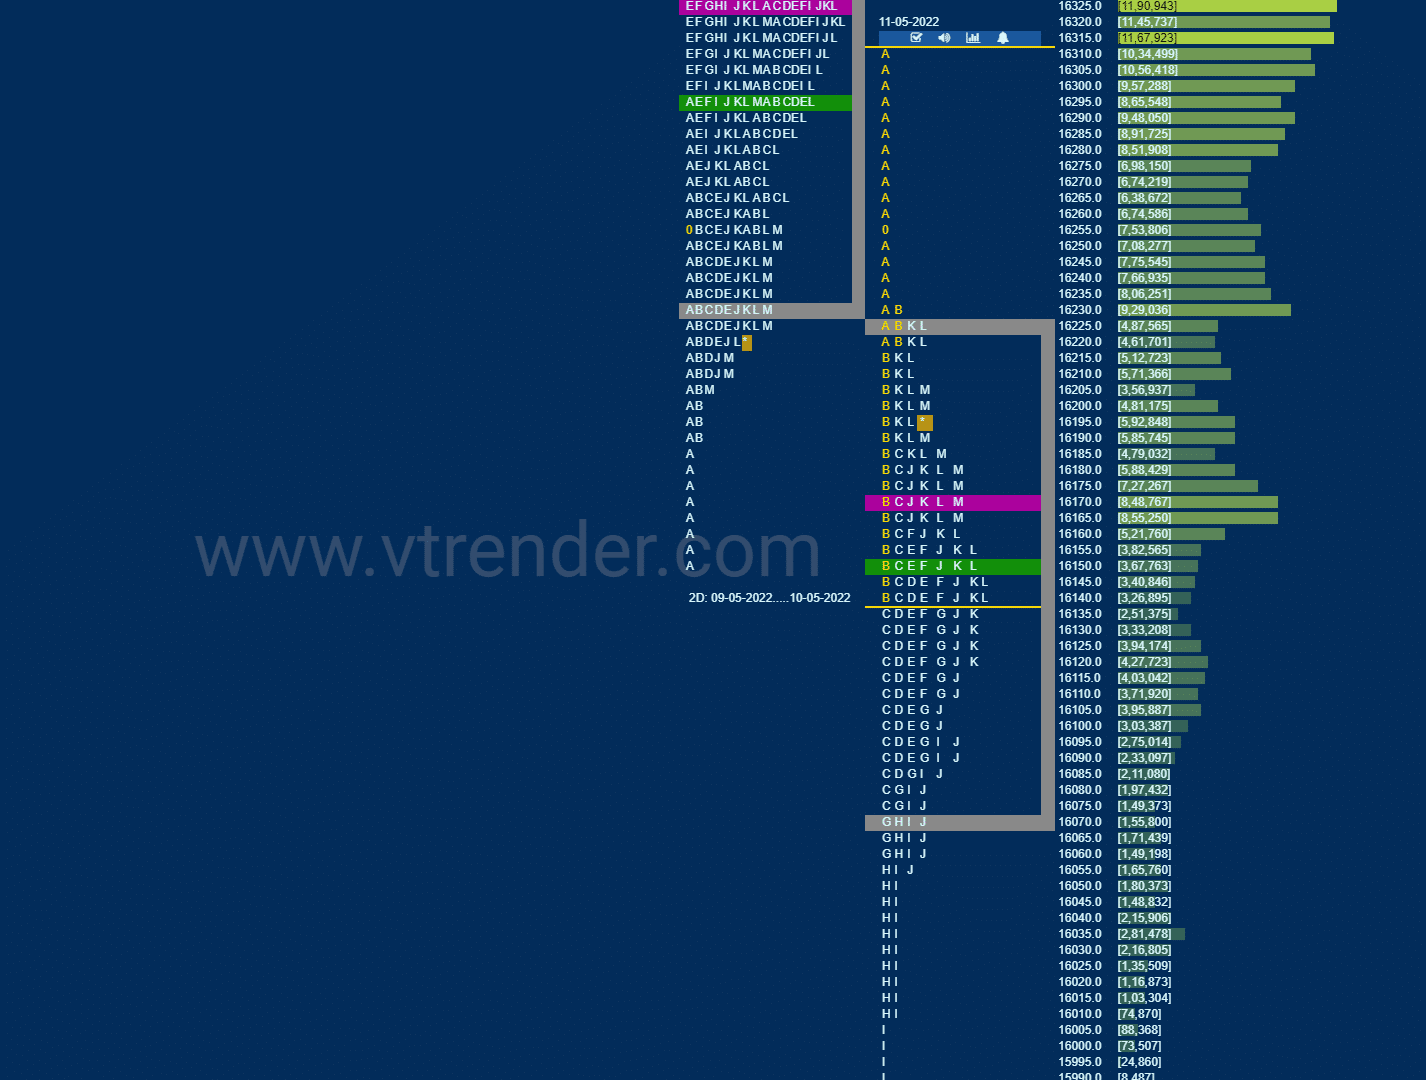 Nf 7 Market Profile Analysis Dated 11Th May 2022 Banknifty Futures, Charts, Day Trading, Intraday Trading, Intraday Trading Strategies, Market Profile, Market Profile Trading Strategies, Nifty Futures, Order Flow Analysis, Support And Resistance, Technical Analysis, Trading Strategies, Volume Profile Trading